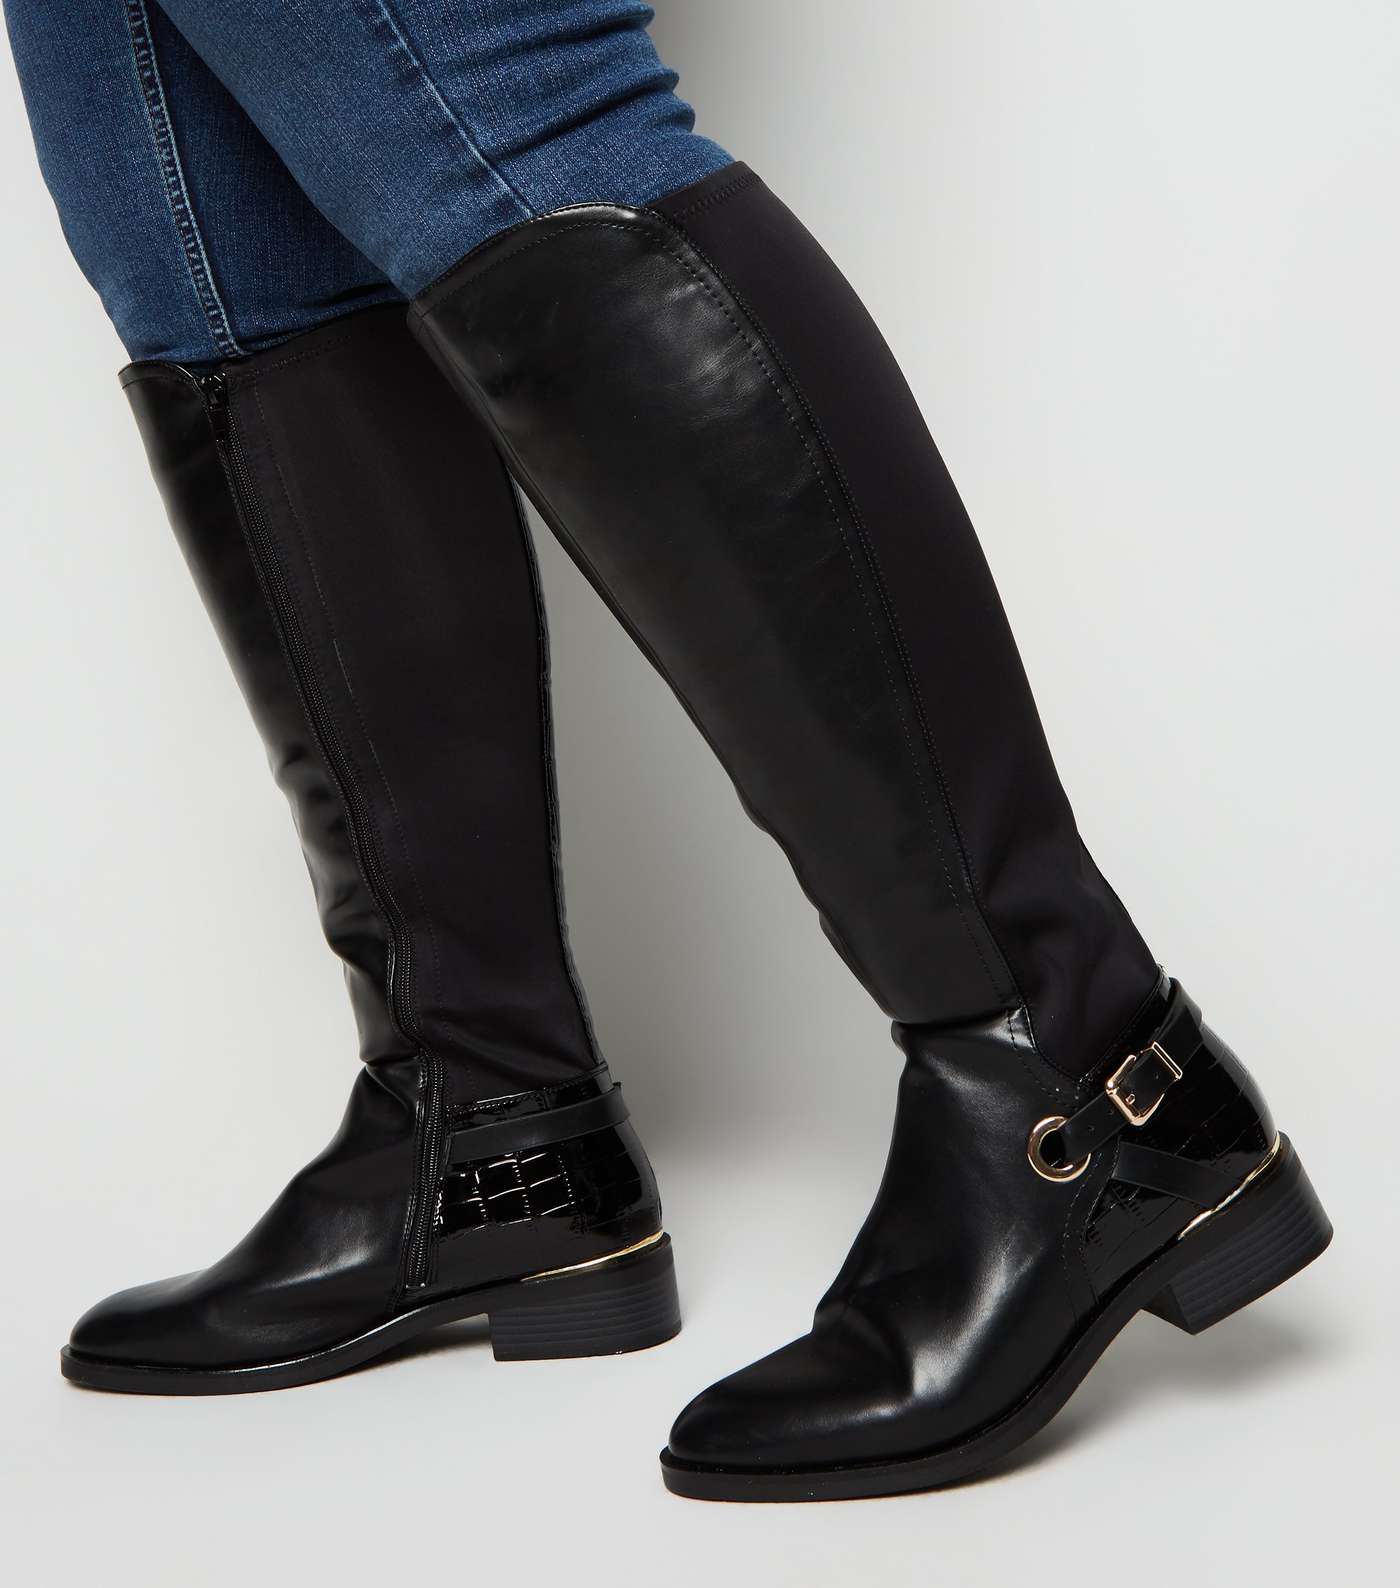 Extra Calf Fit Black Leather-Look Knee High Boots Image 2